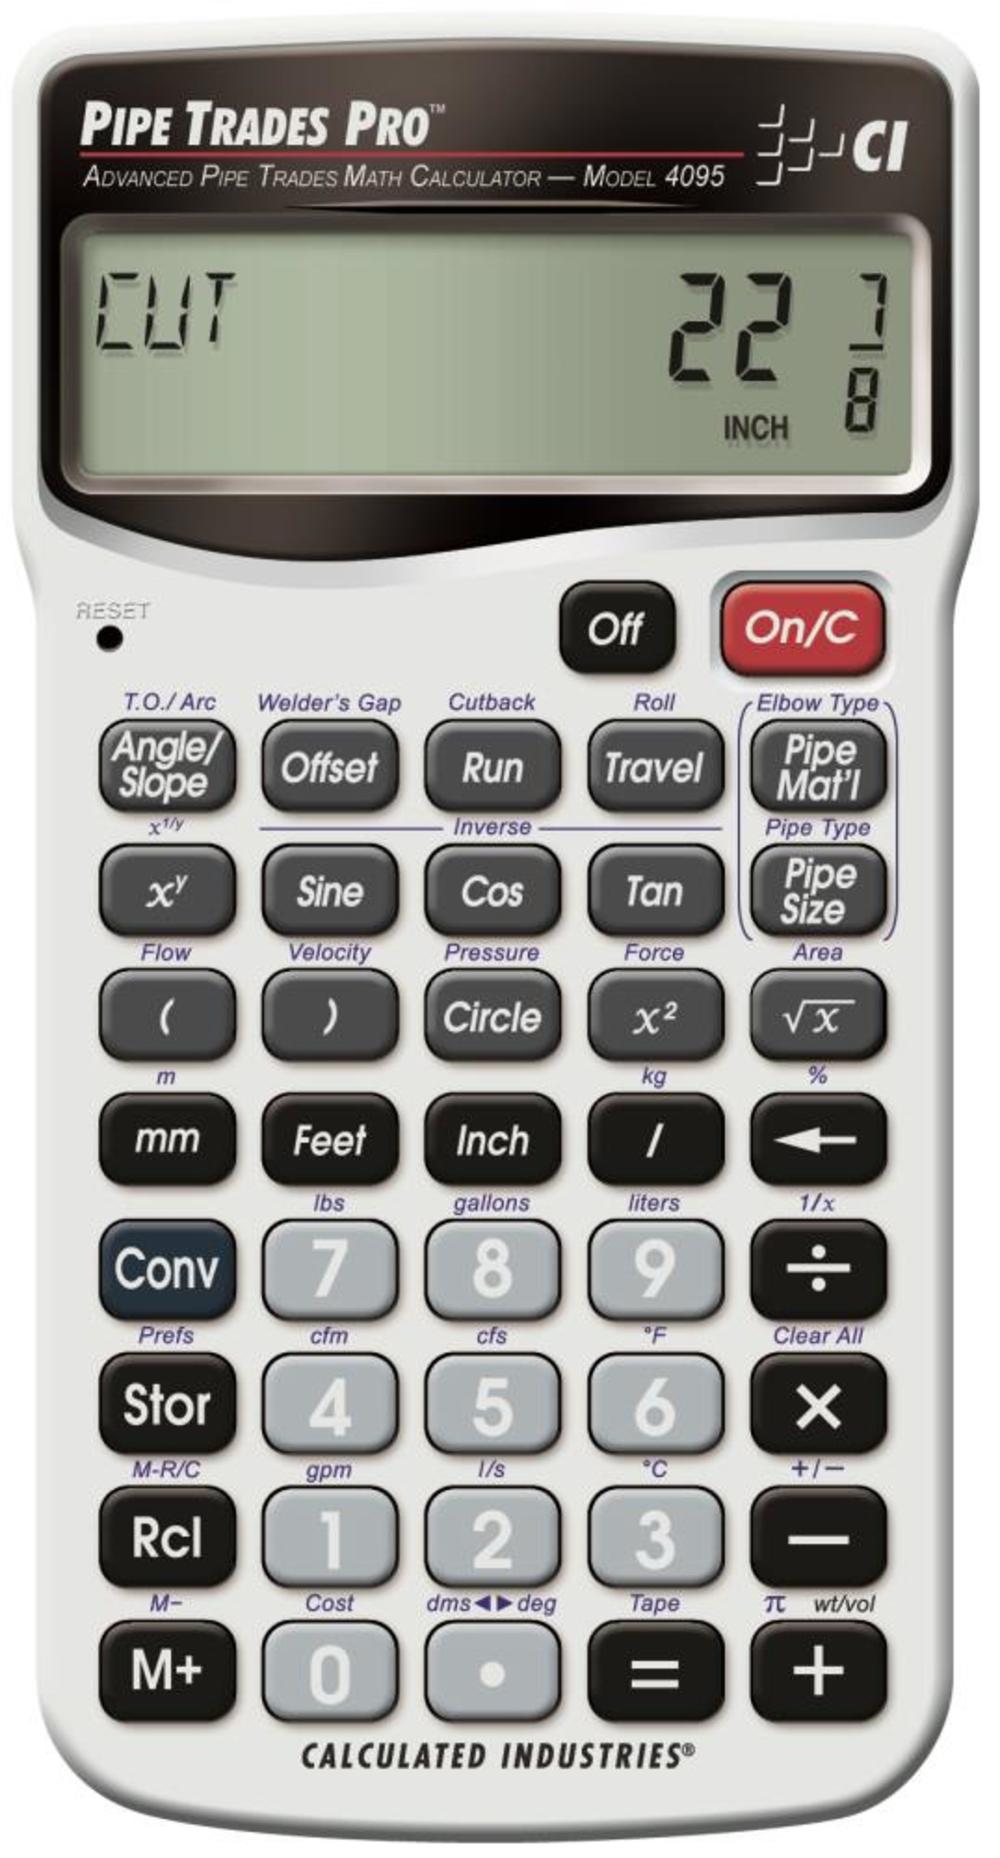 Calculated Industries 4095 Pipe Trades Pro Calculator